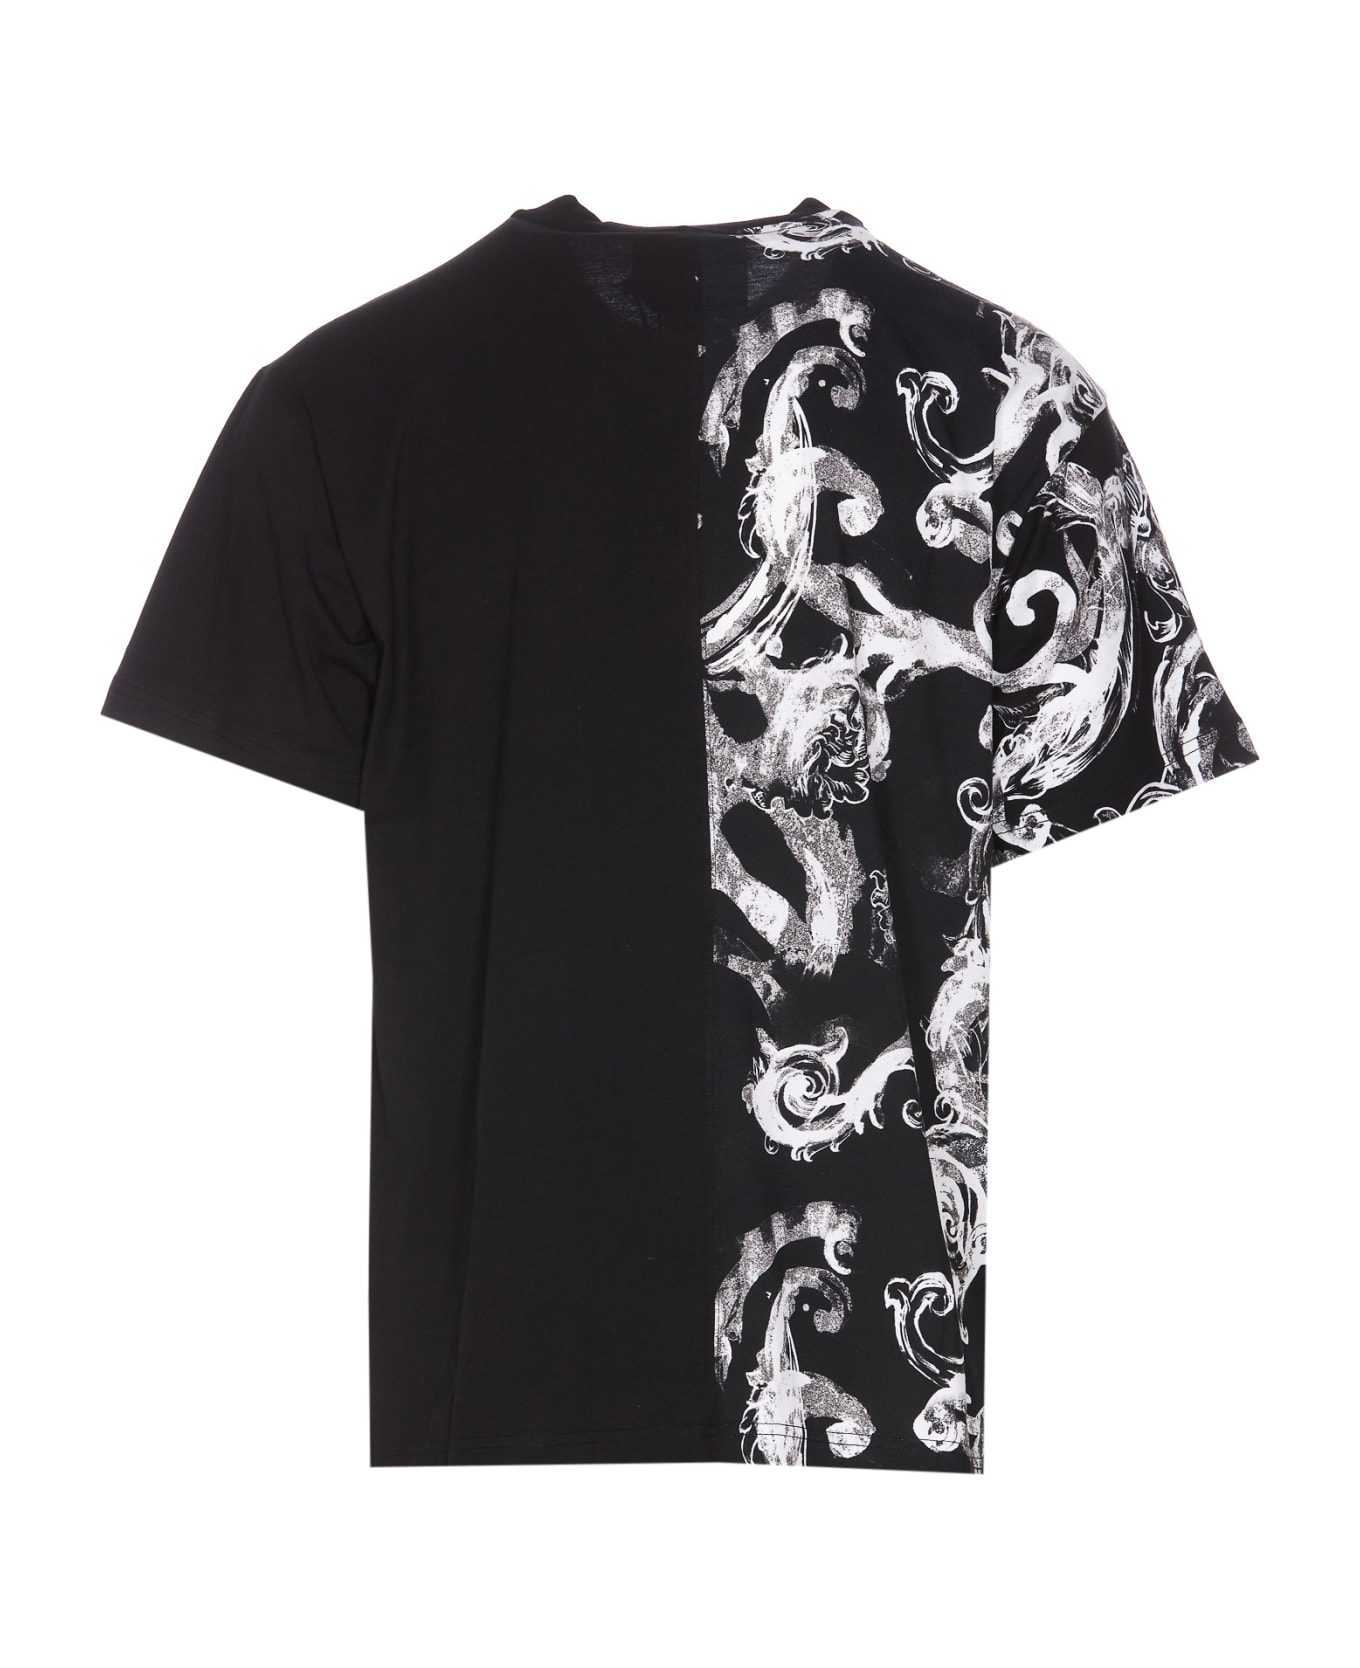 Versace Jeans Couture Printed T-shirt - Black